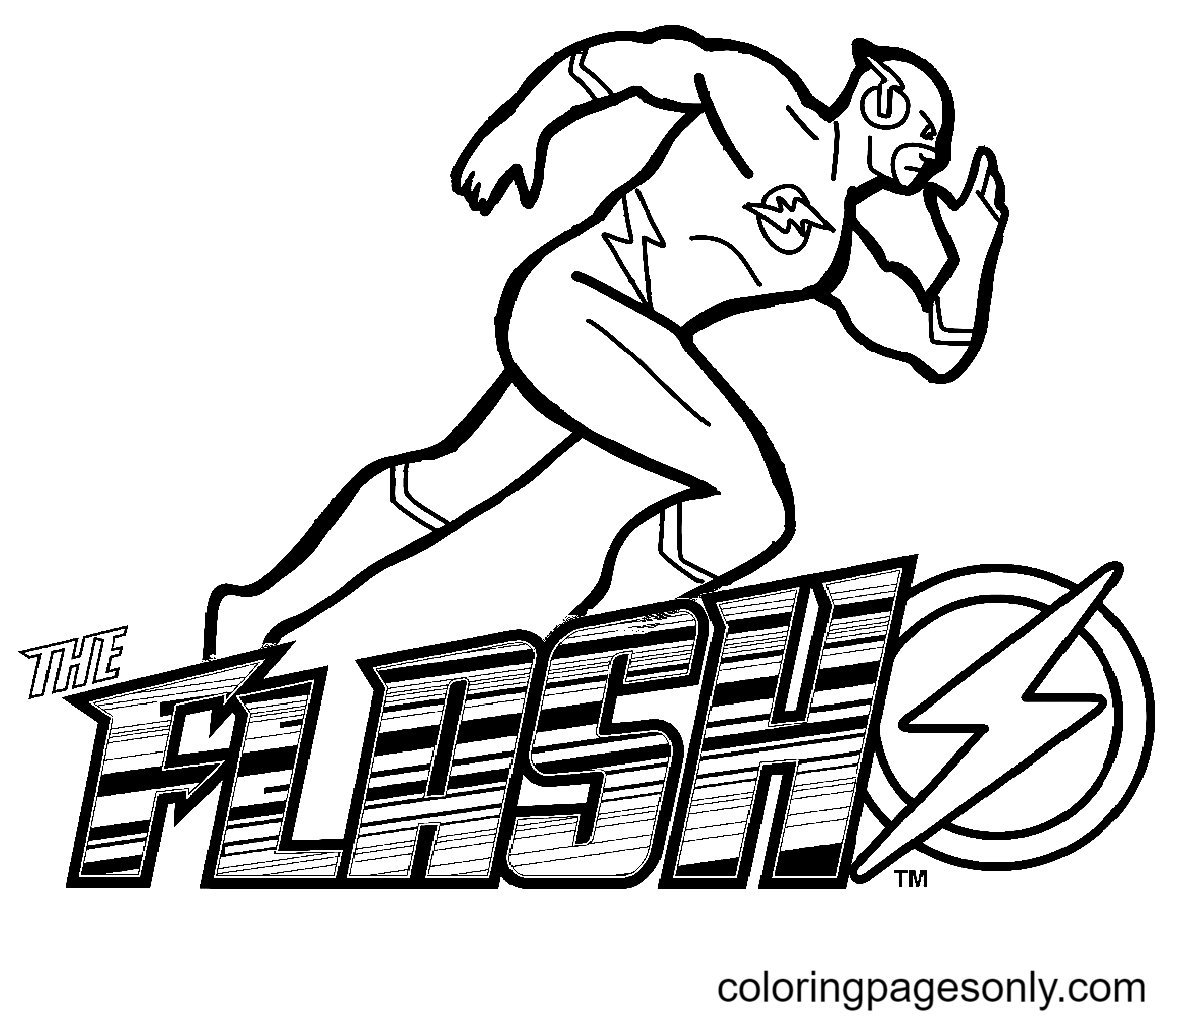 The flash coloring pages printable for free download